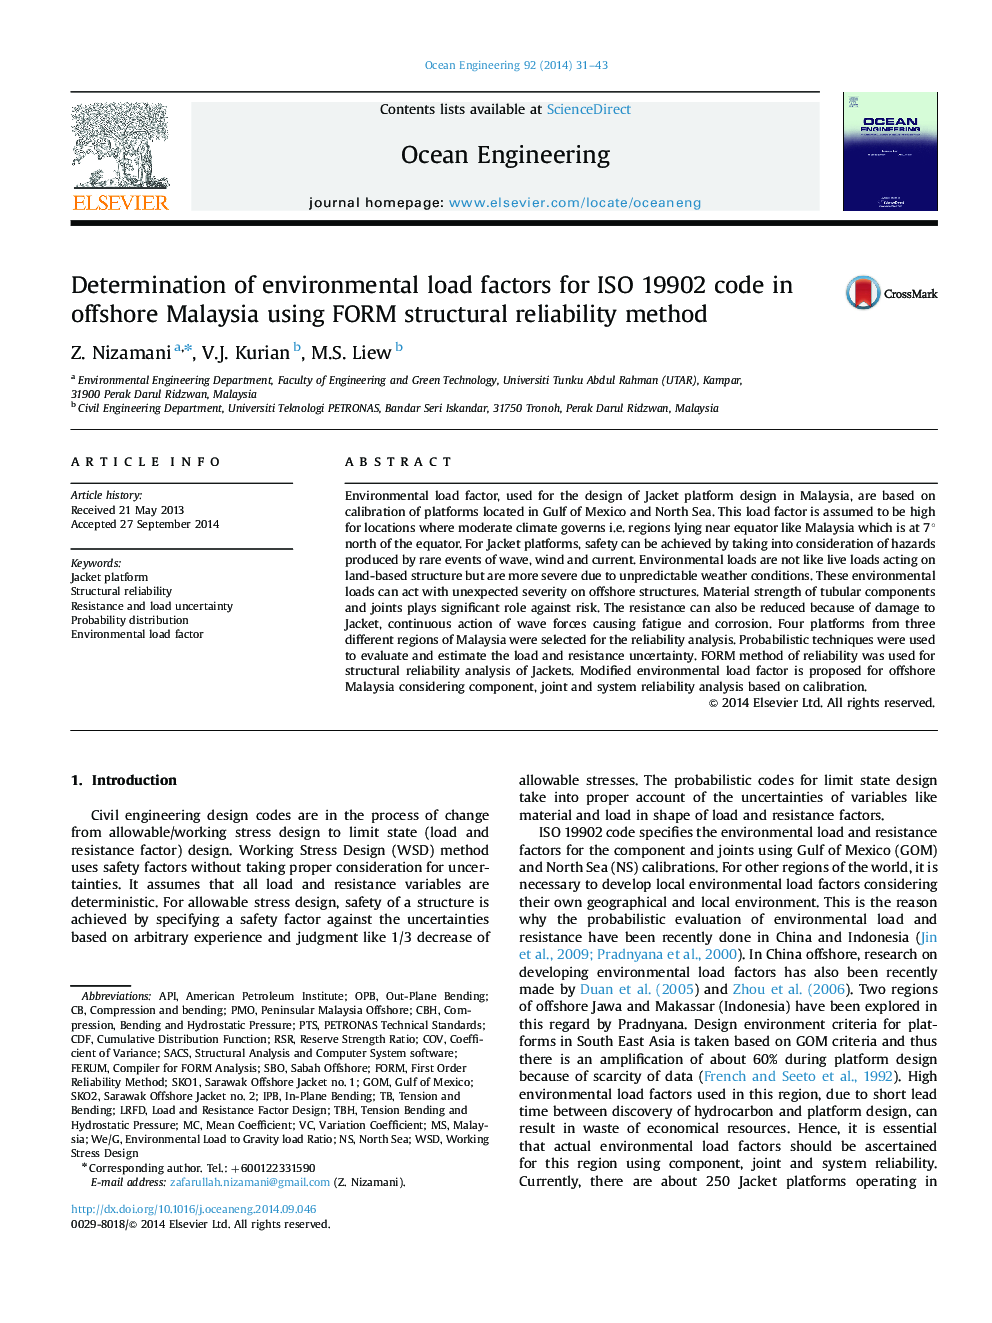 Determination of environmental load factors for ISO 19902 code in offshore Malaysia using FORM structural reliability method